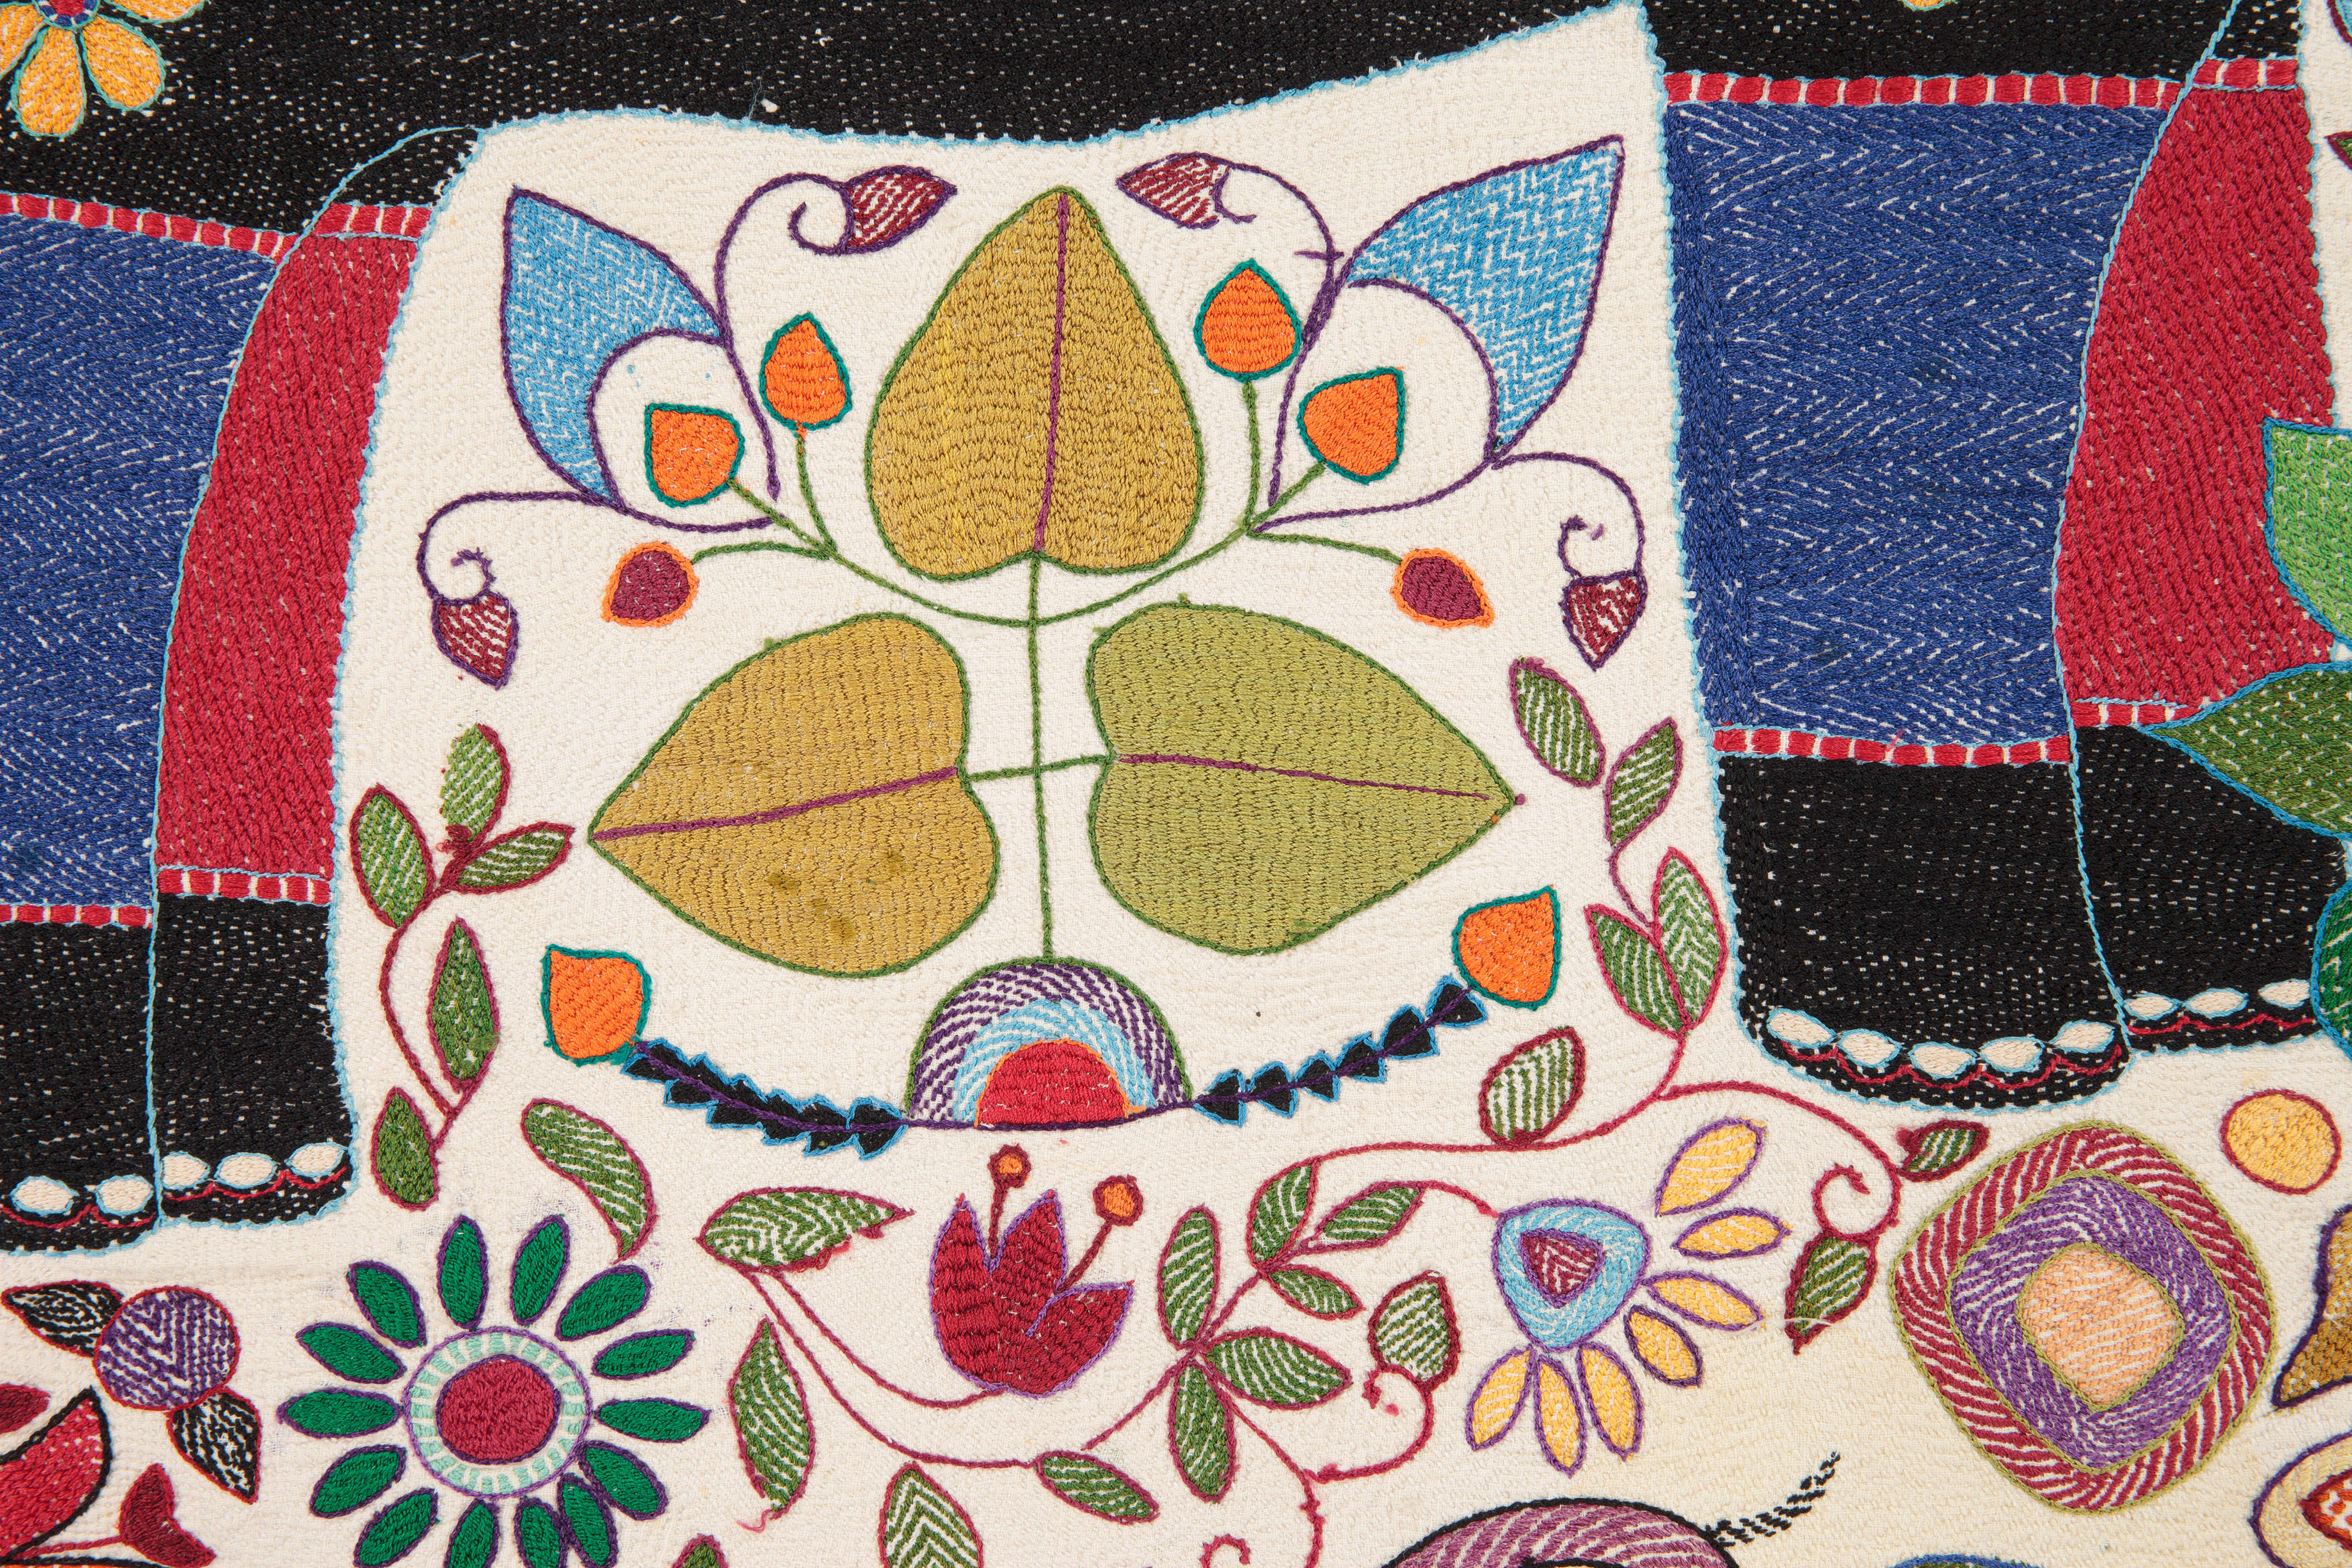 close up detail of embroidery featuring multi-coloured floral motifs using a combination of running, chain, herringbone, satin and cross stitch.